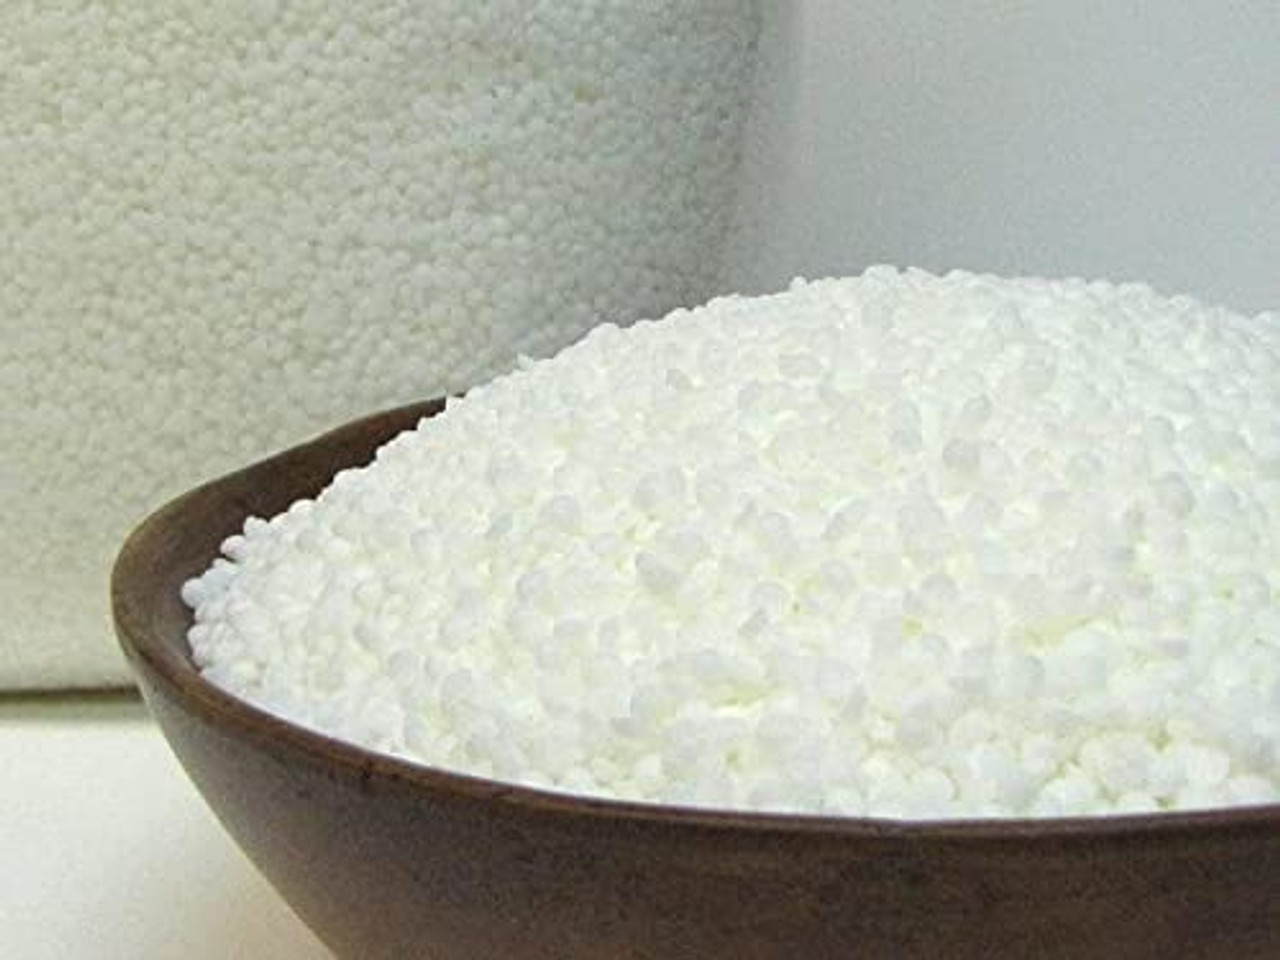  American Soy Organics- Freedom Soy Wax Beads for Melt Making –  Microwavable Soy Wax Beads – Premium Soy Melt Making Supplies (10-Pound Box)